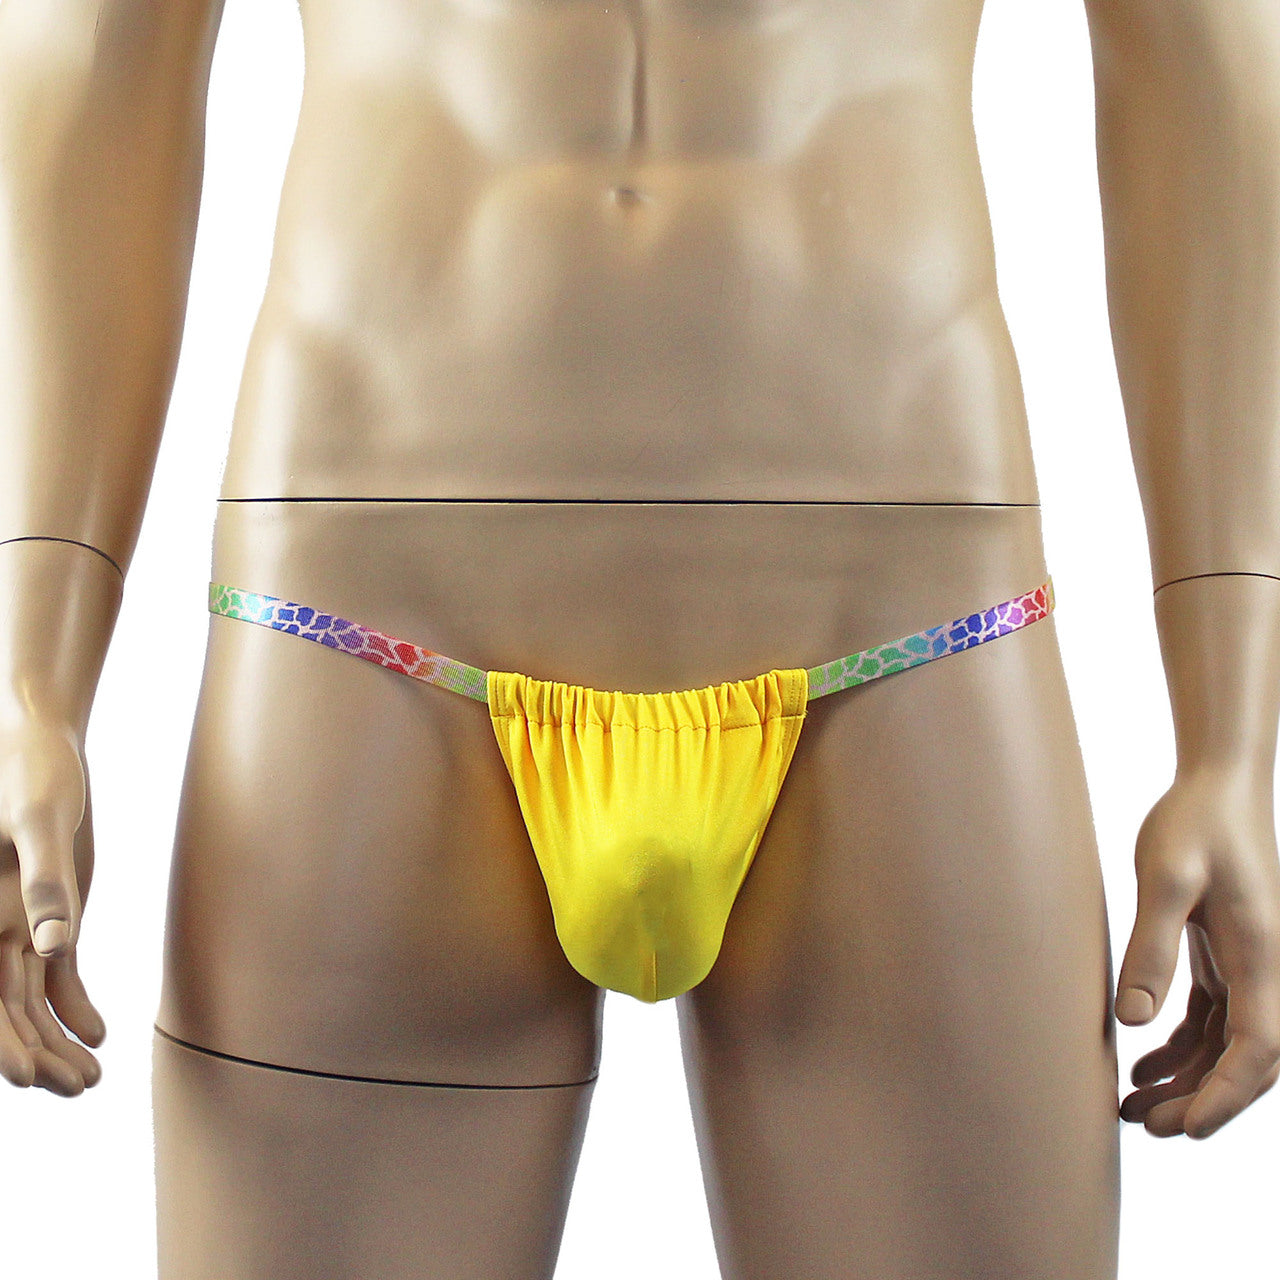 Mens Wild Colourful Adjustable Ball Bag Pouch G string Underwear Yellow